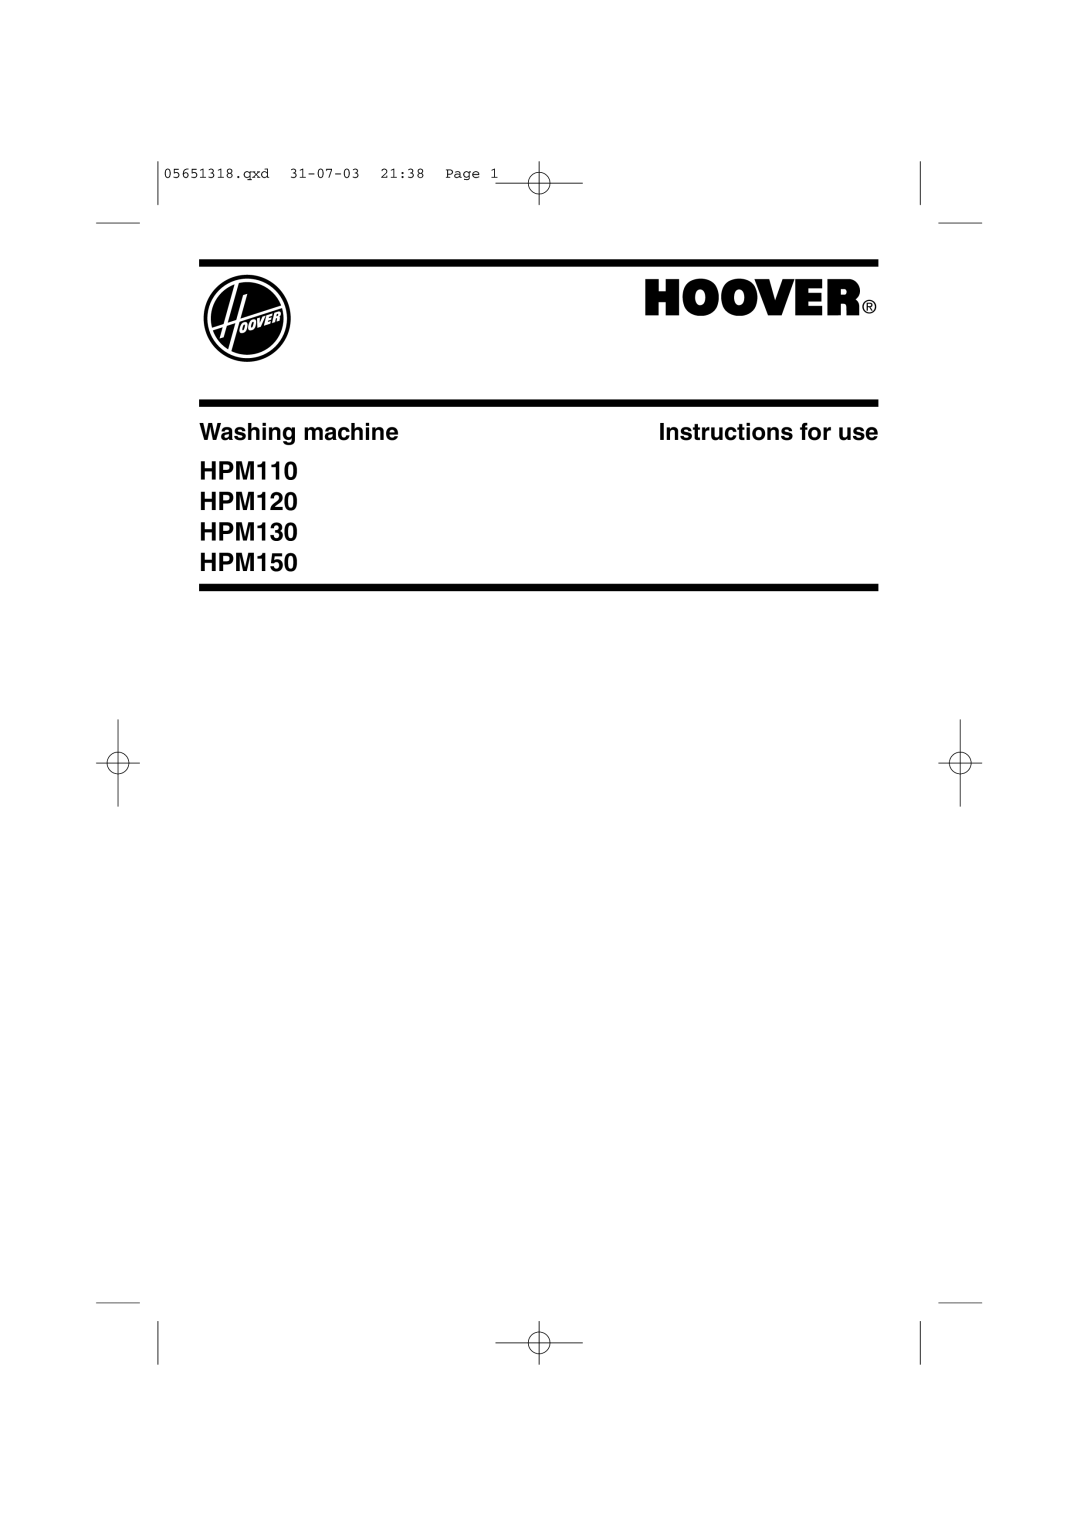 Hoover manual HPM110 HPM120 HPM130 HPM150, Washing machine, Instructions for use, qxd 31-07-03 2138 Page 